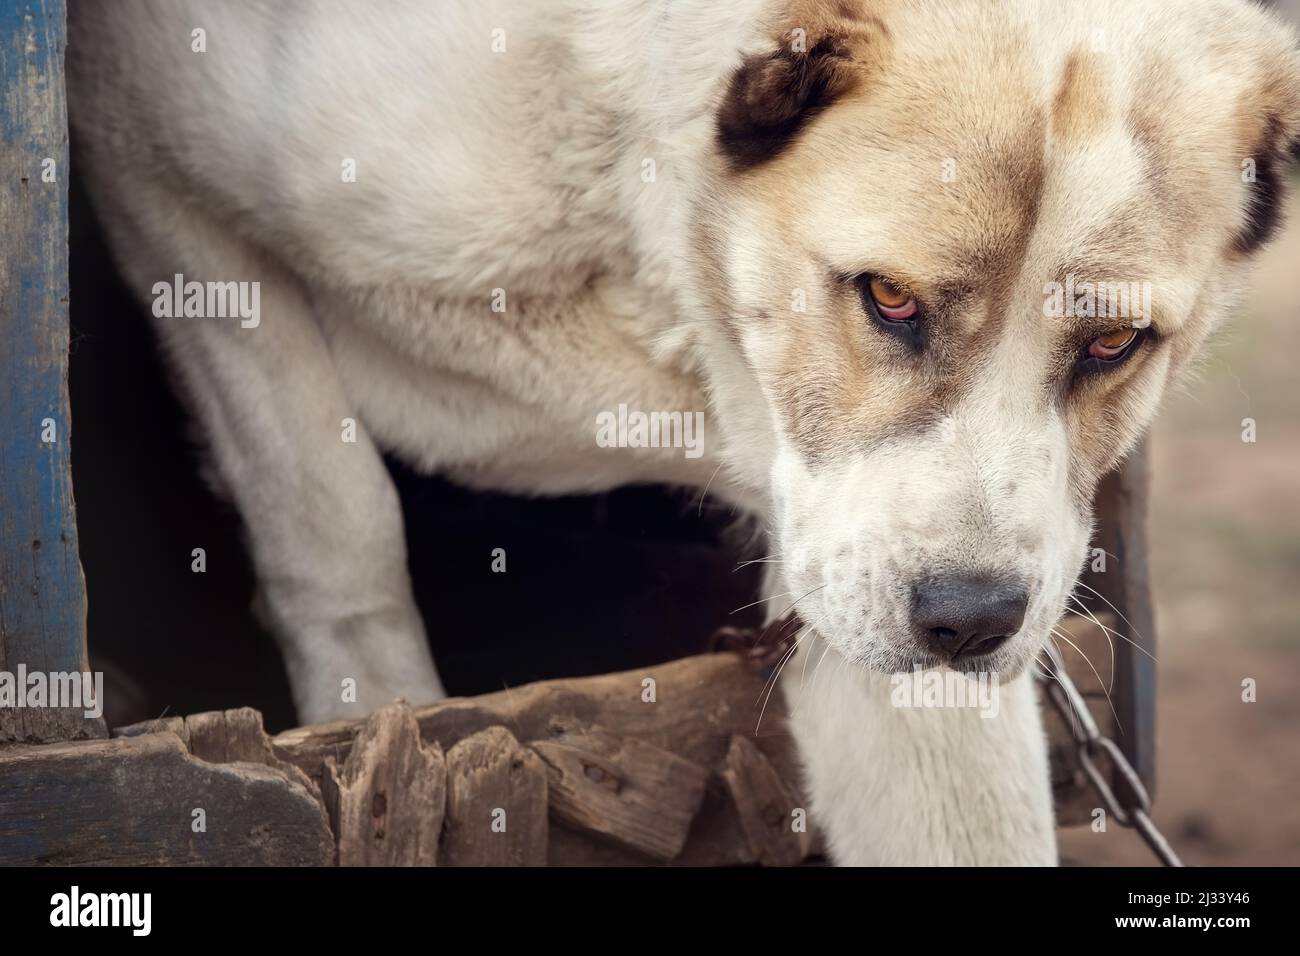 The Asian Shepherd menacing dog come out of his doghouse. Stock Photo